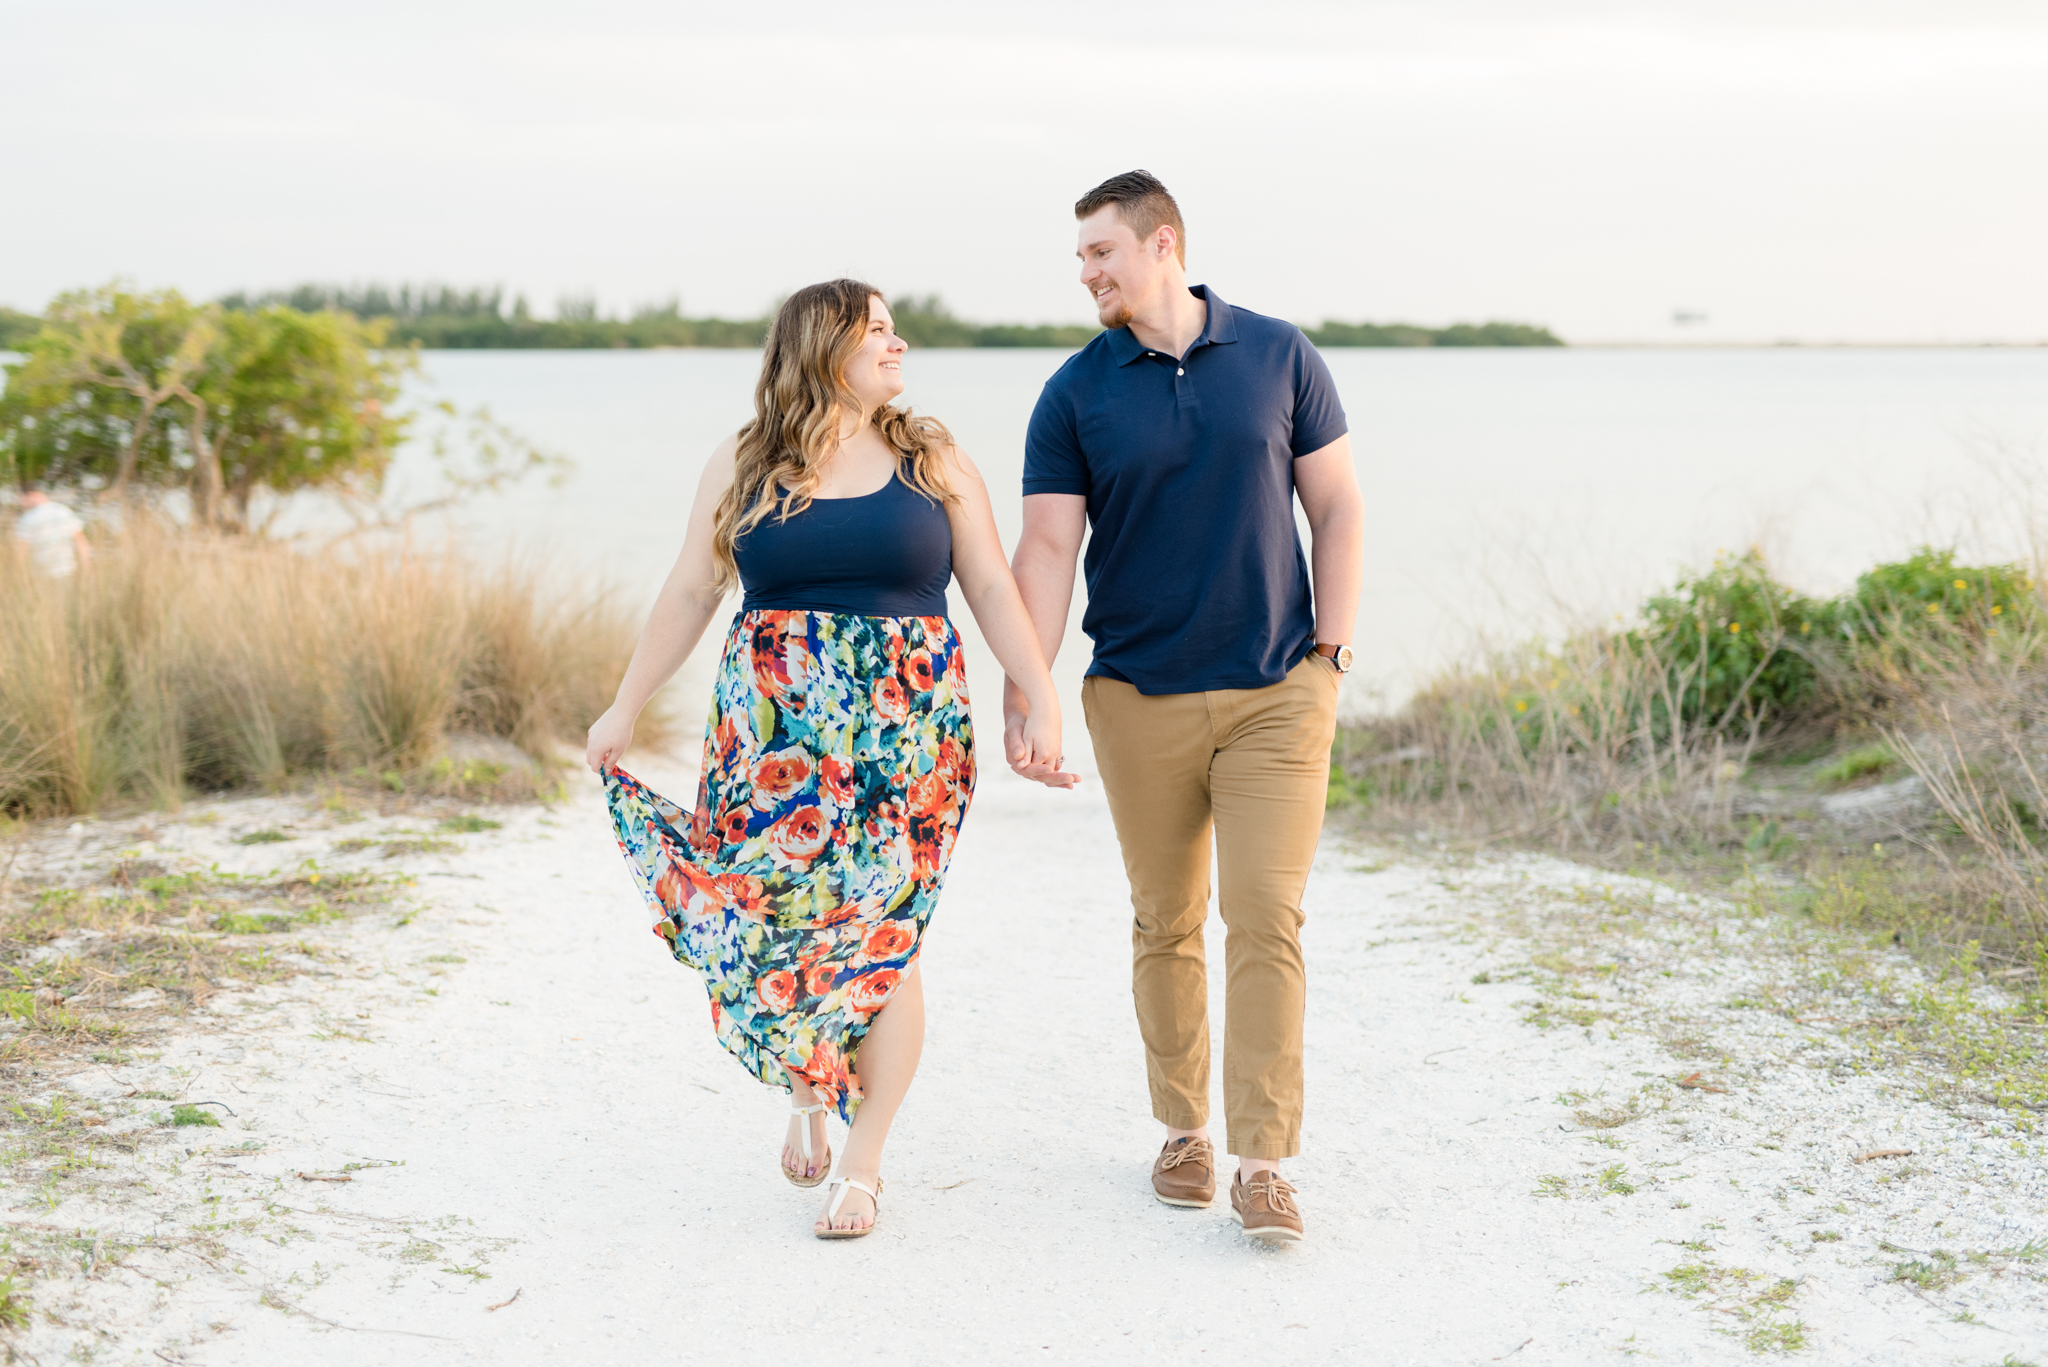 Couple walks and laughs on beach path.